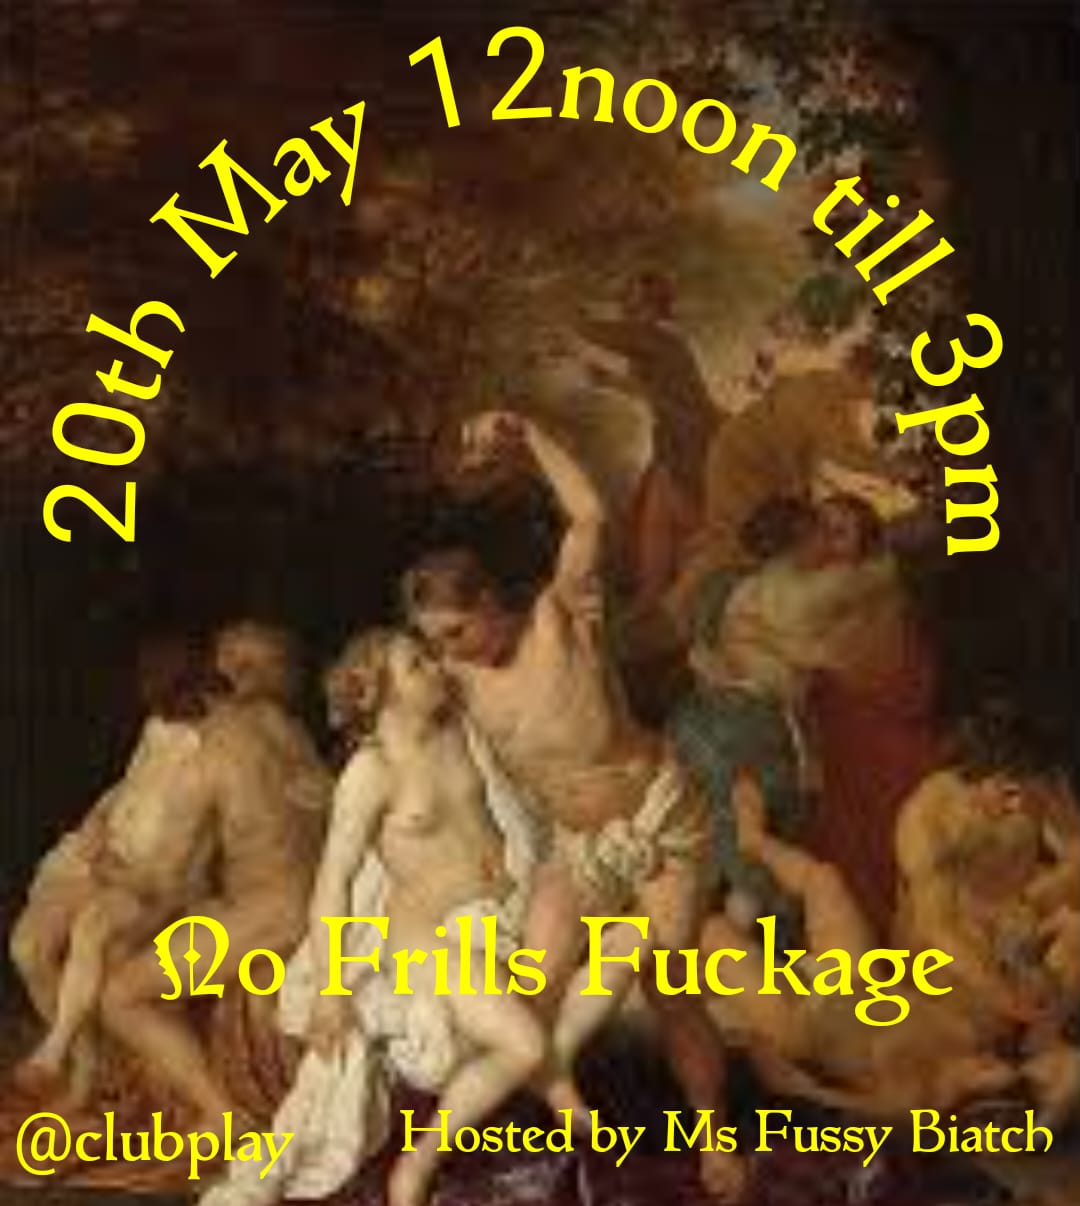 ** NFF ( No Frills Fuckage ) ** Sat 20 May ** CLUB PLAY 12 Noon - 3AM ** FREE ENTRY FOR SINGLE LADIES **